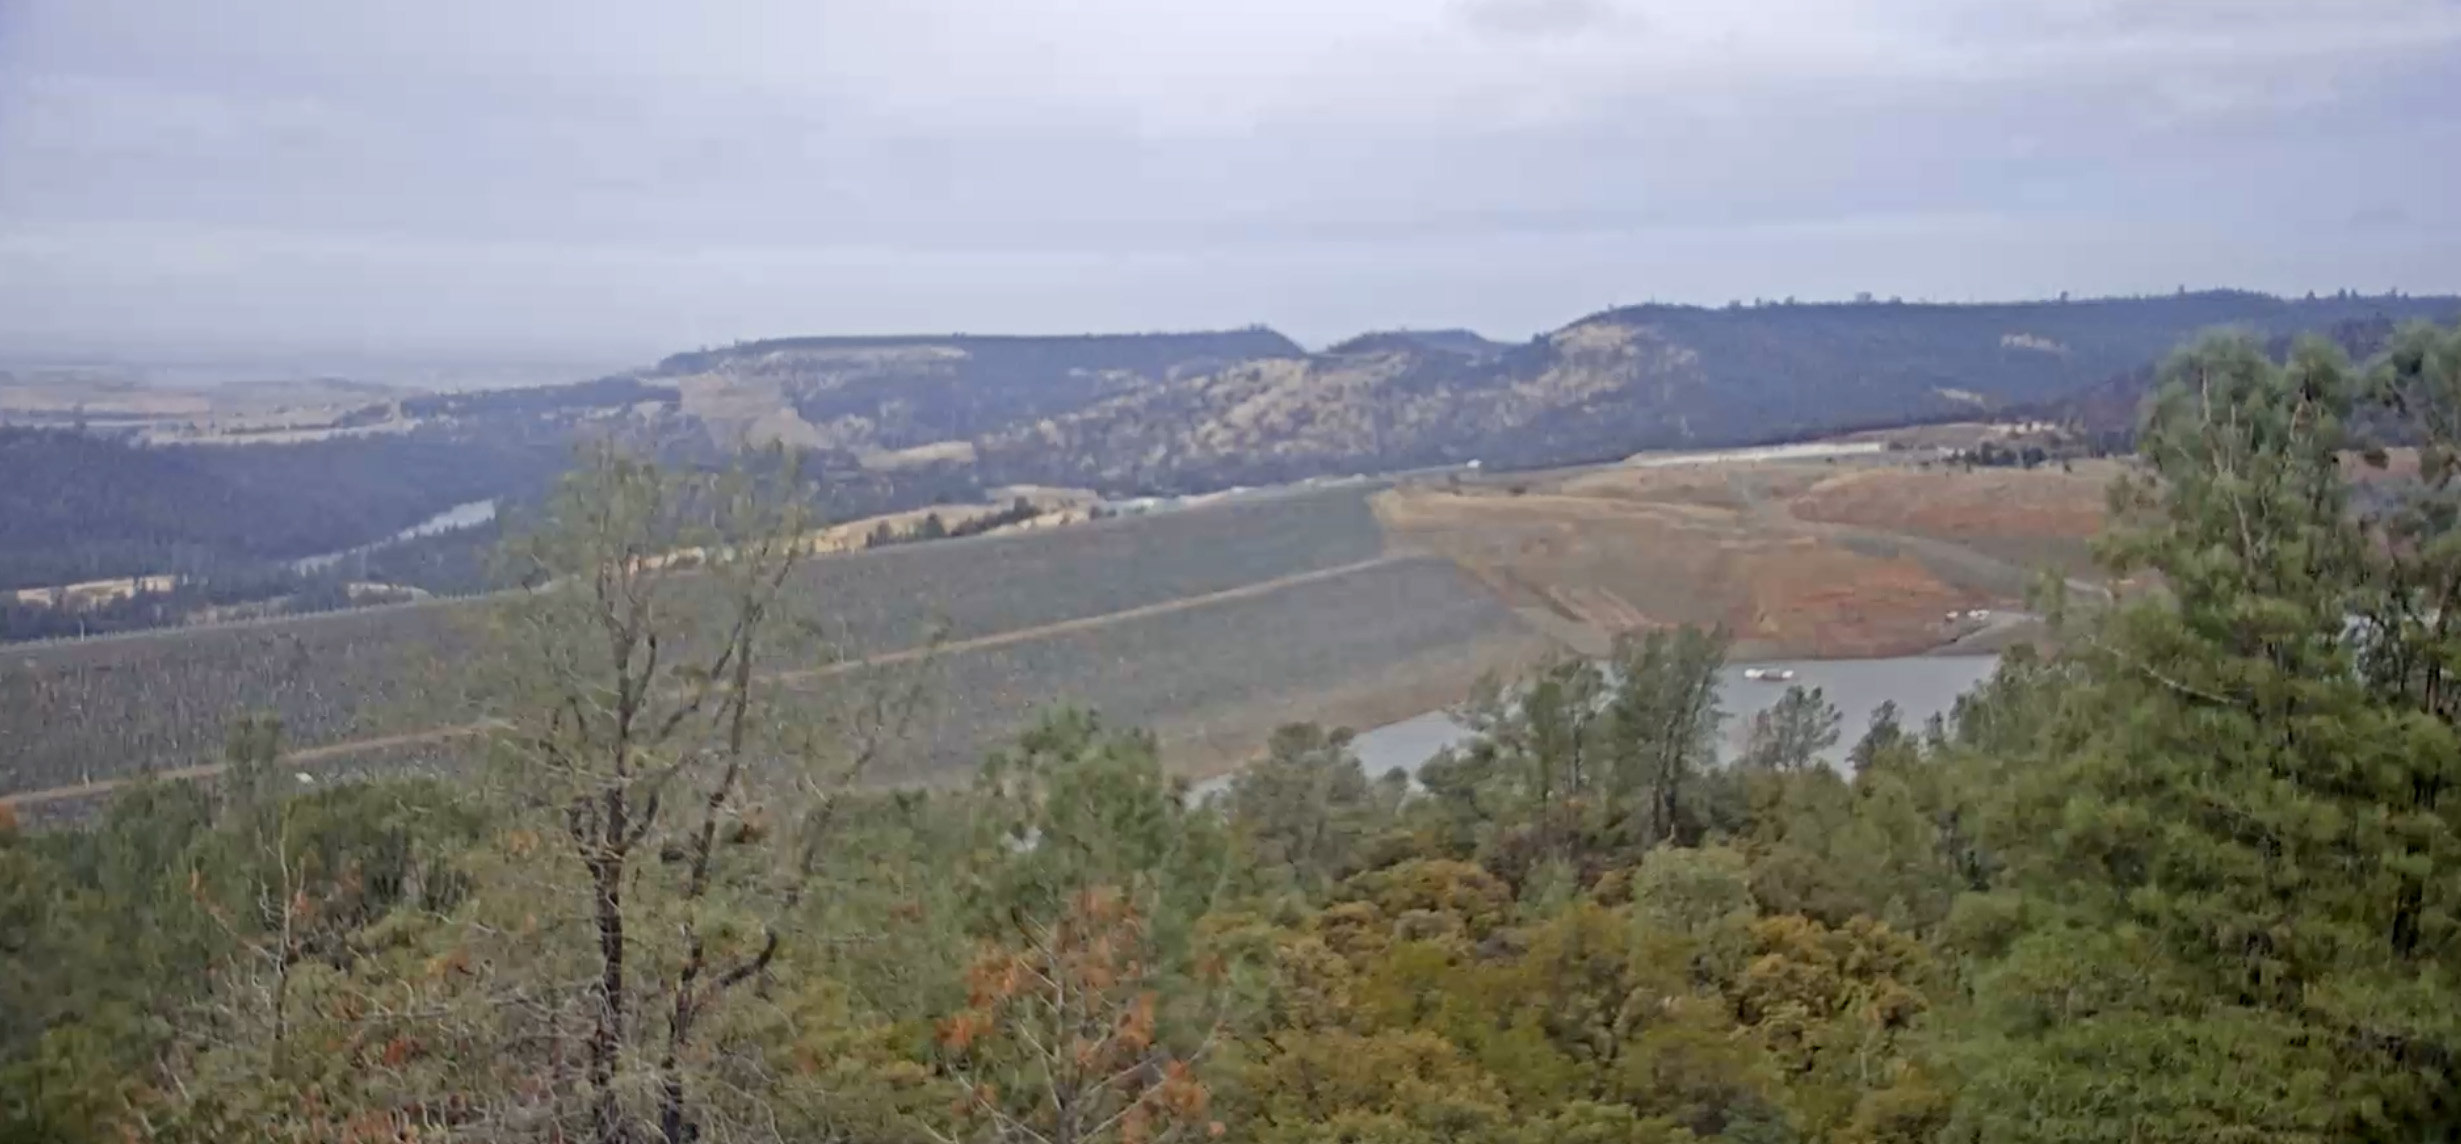 PHOTO: A still from a webcam showing Lake Oroville in California, Oct. 26, 2021.